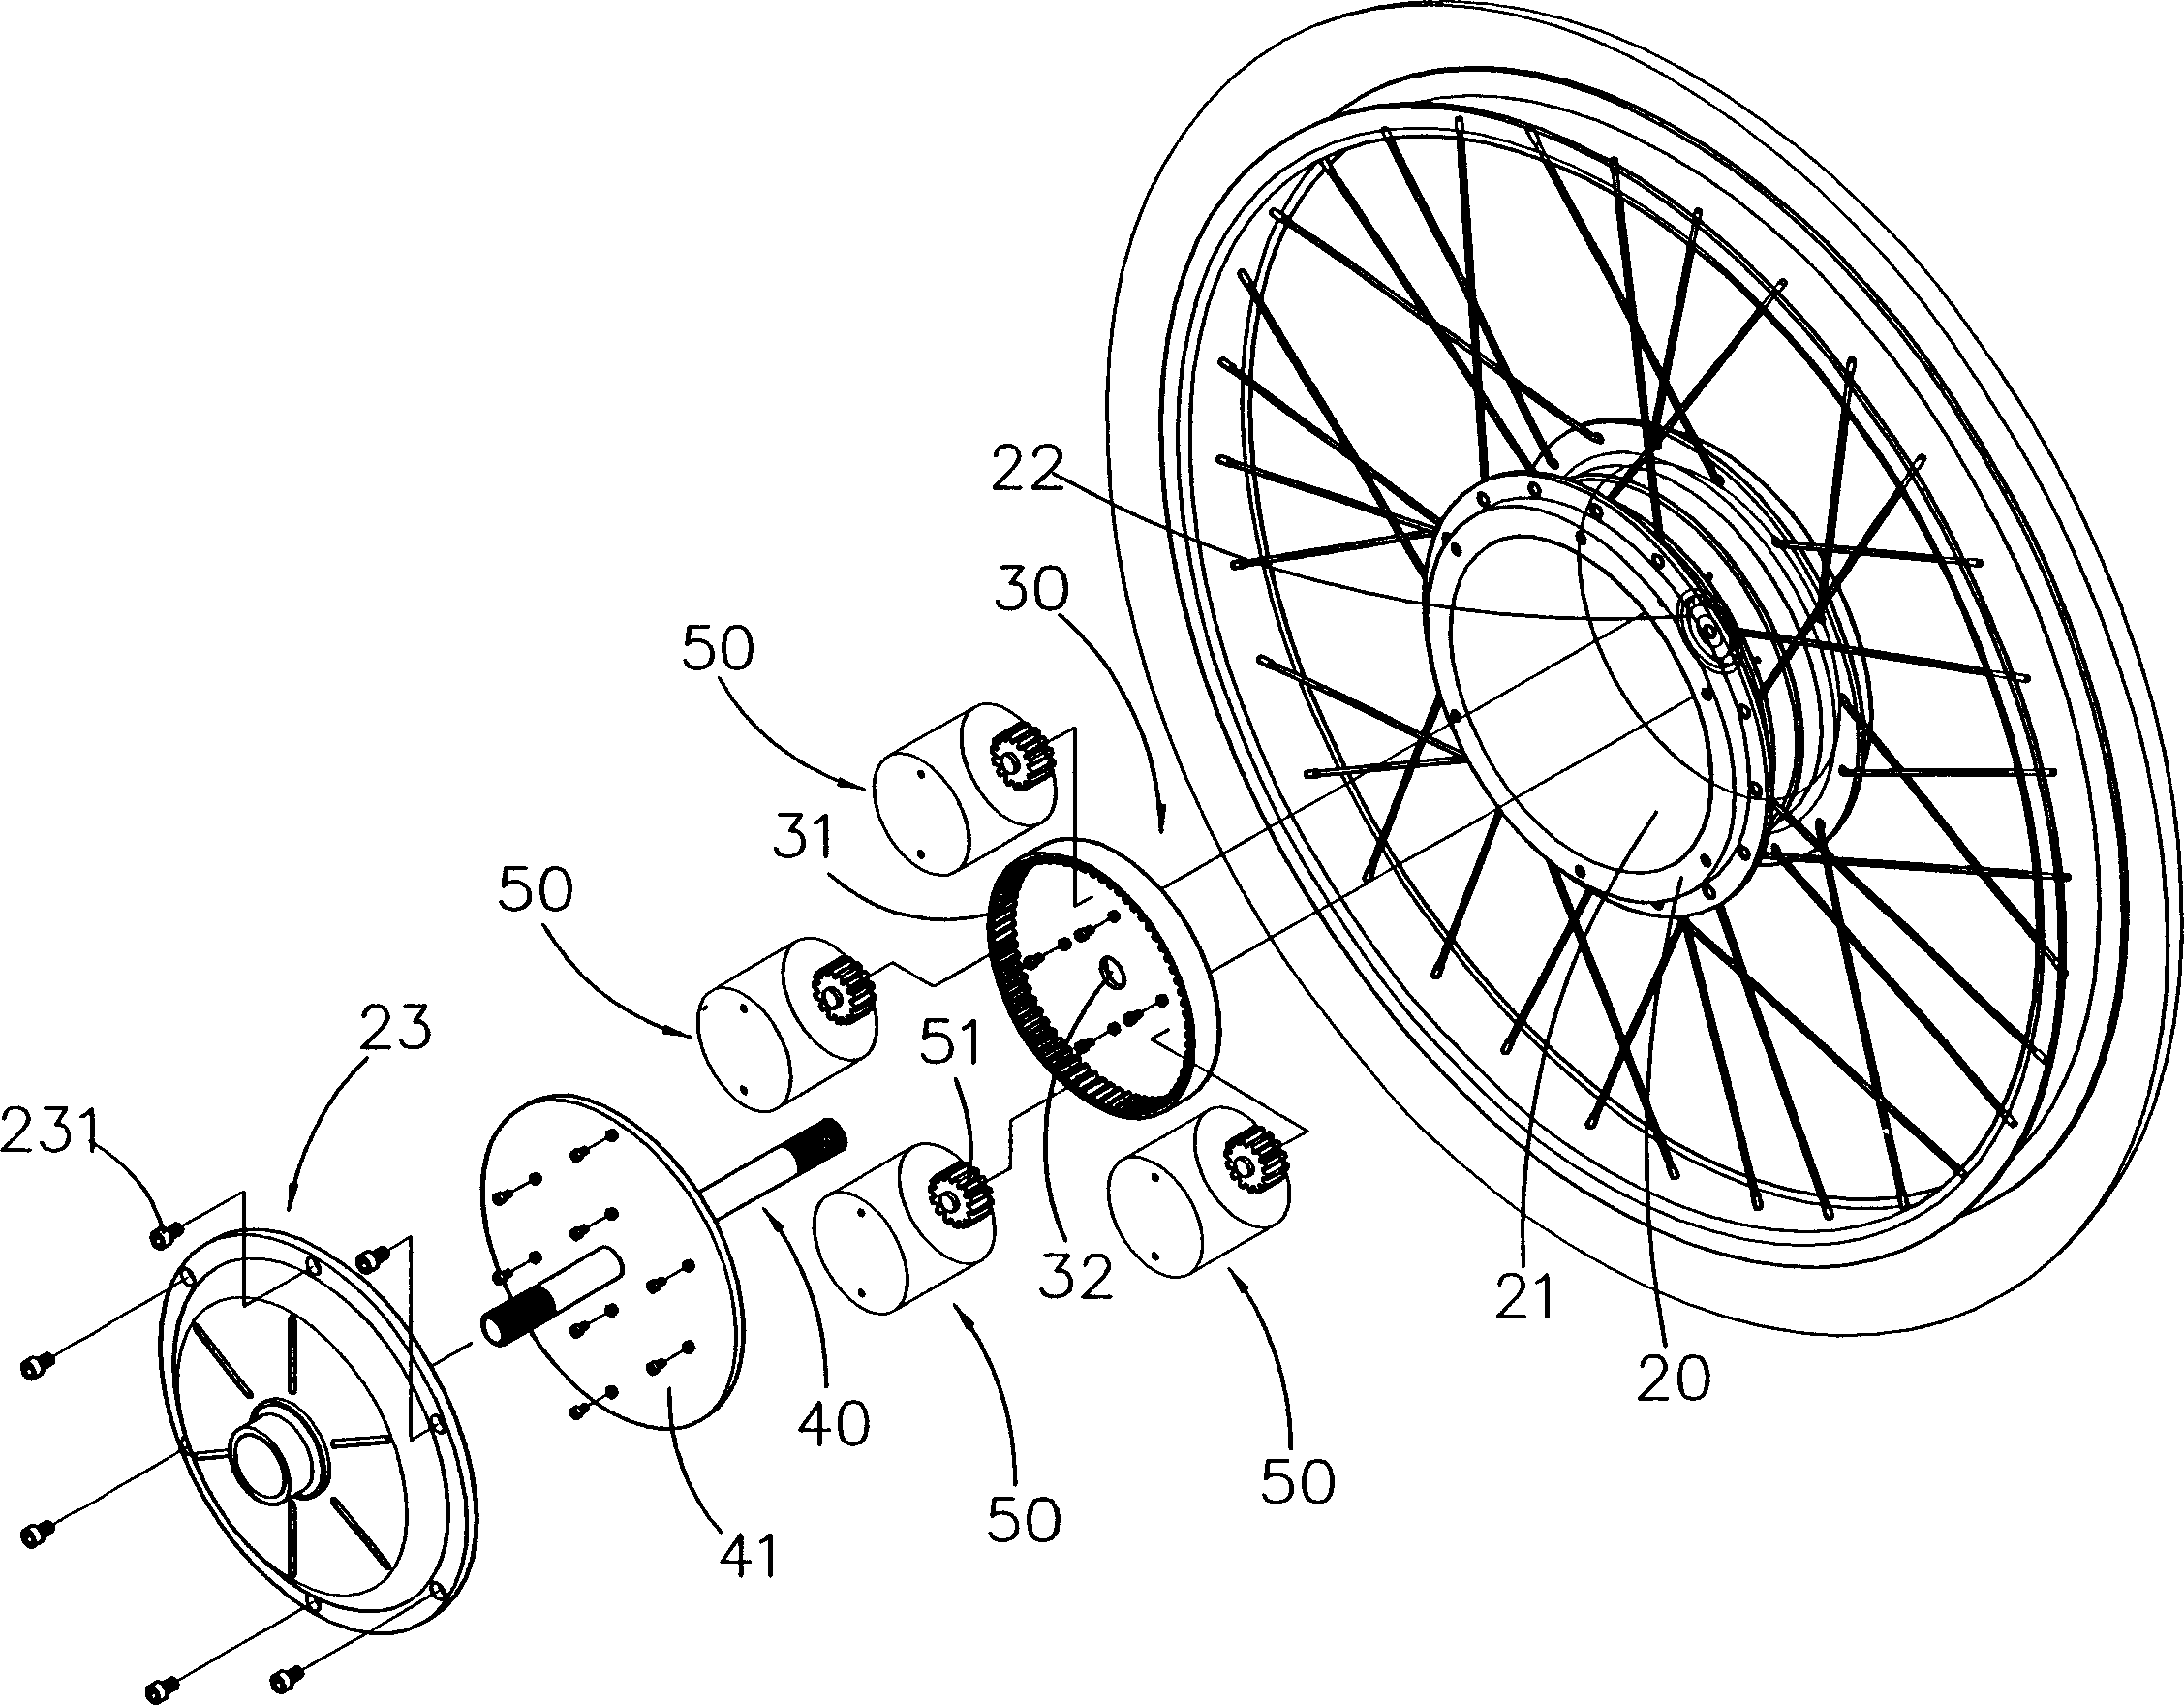 A structure for making up wheel hub by multiple motors